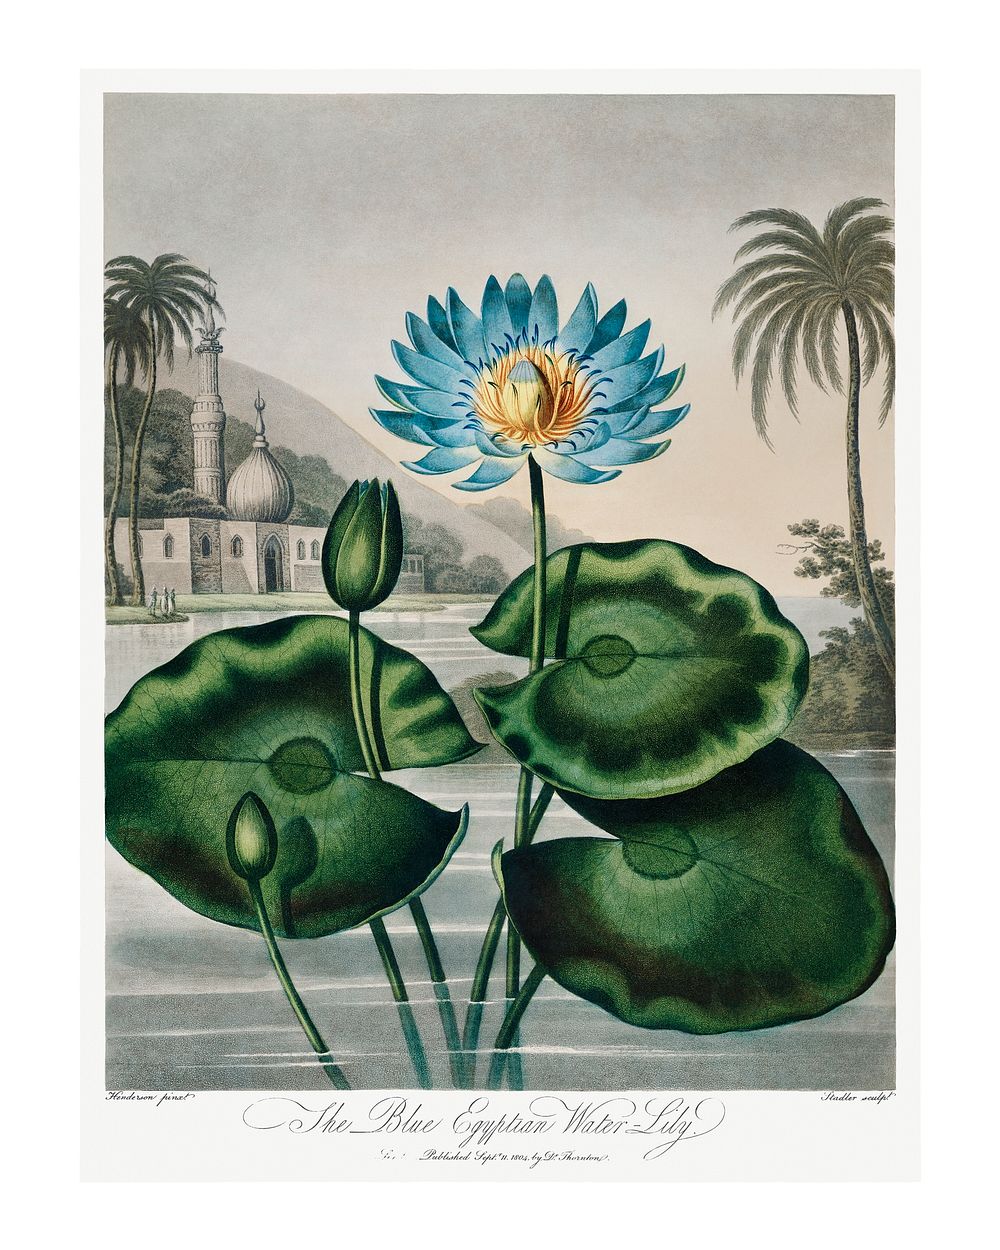 Water-Lily wall art (1807) by Robert John Thornton. Original from Biodiversity Heritage Library. Digitally enhanced by…